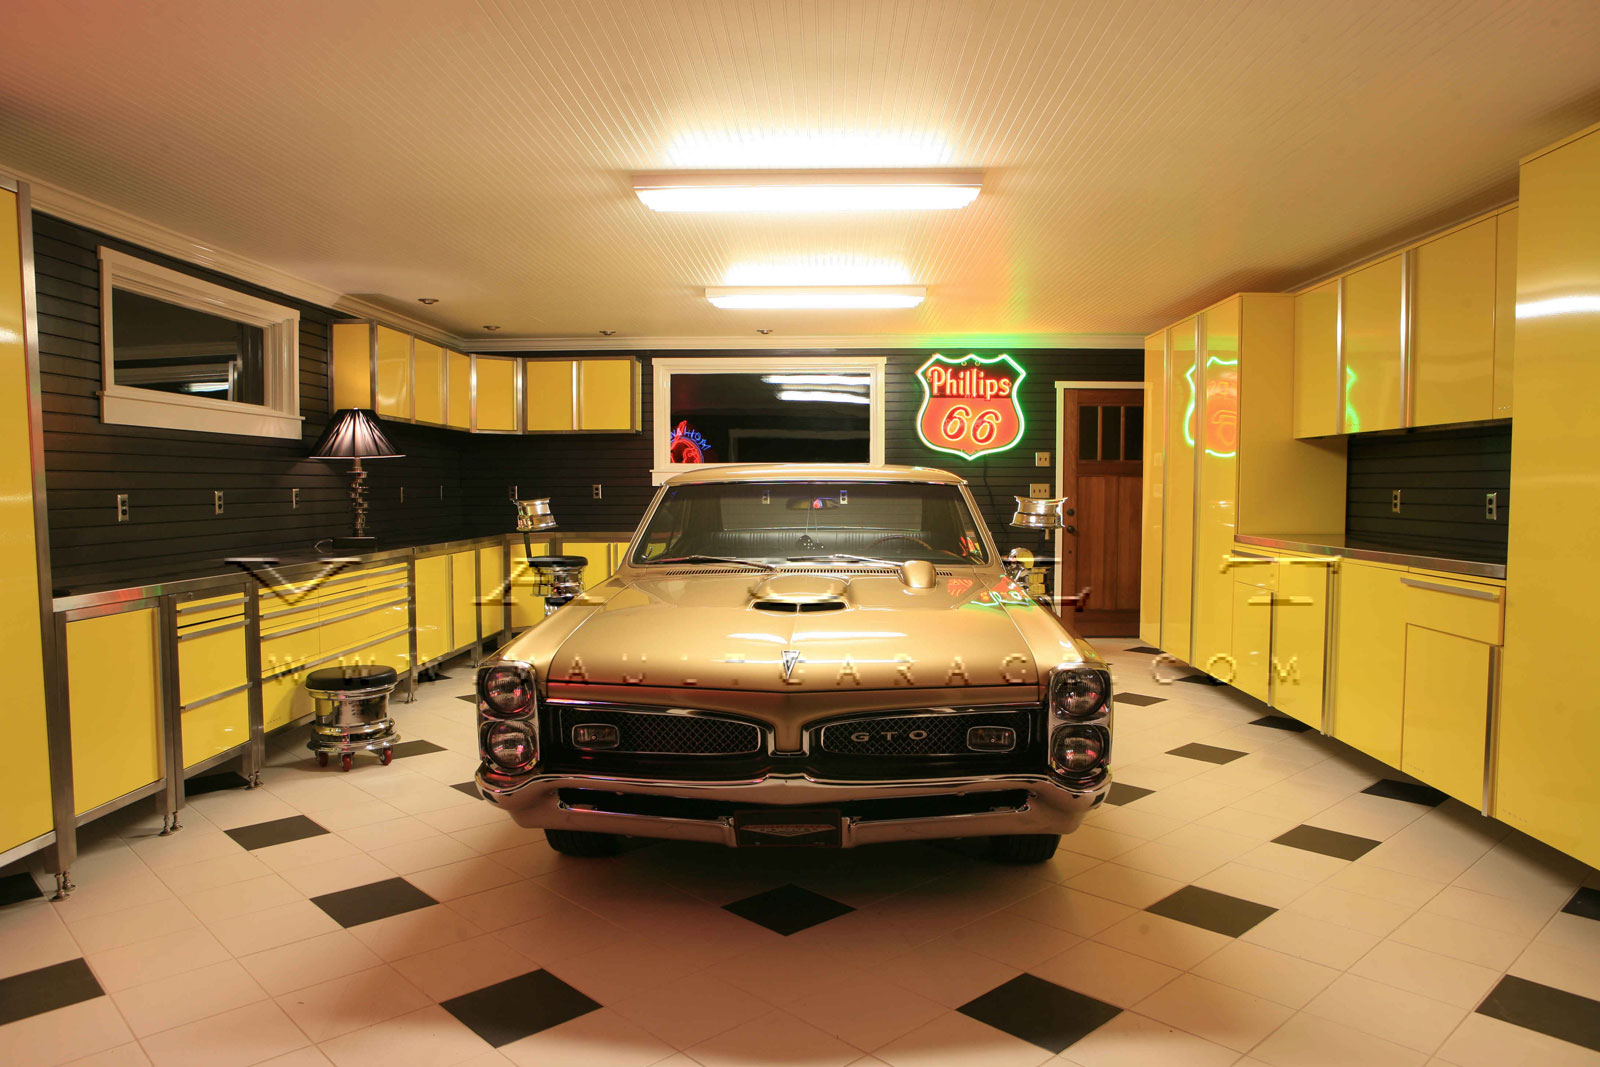 Garage Design Traditional Small Garage Design Ideas In Terrific Traditional Style Using Yellow Garage Cabinet And Concrete Flooring Design For Inspiration Decoration Garage Design Ideas With Cabinet And Hanger Compartment For The Sake Of Good Arrangement